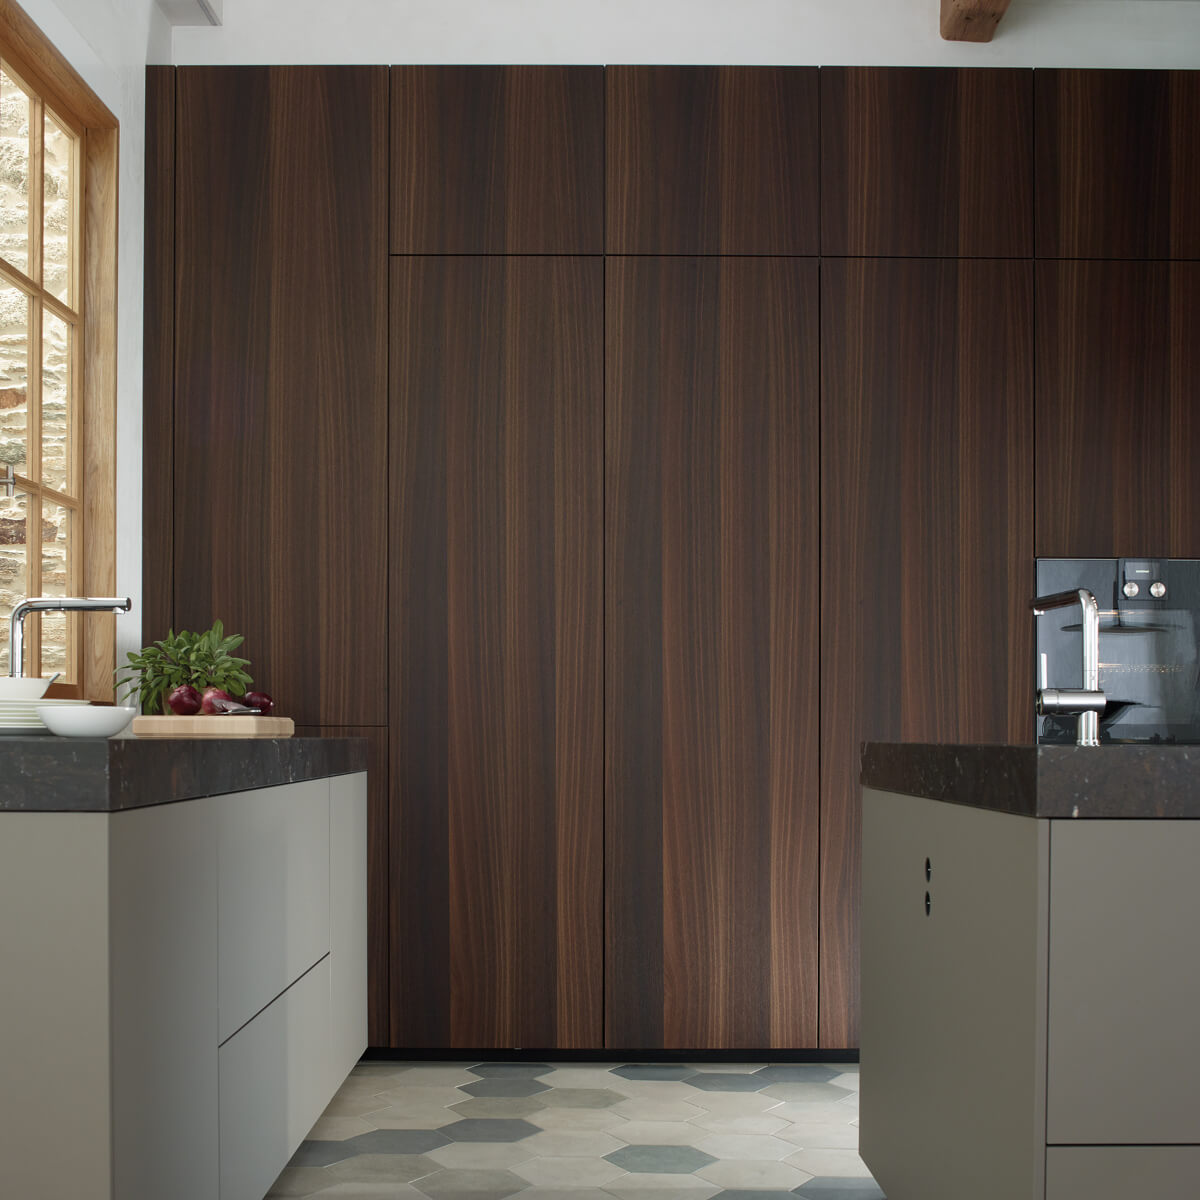 Santos kitchens with natural veneered wood finishes: unique and dynamic designs